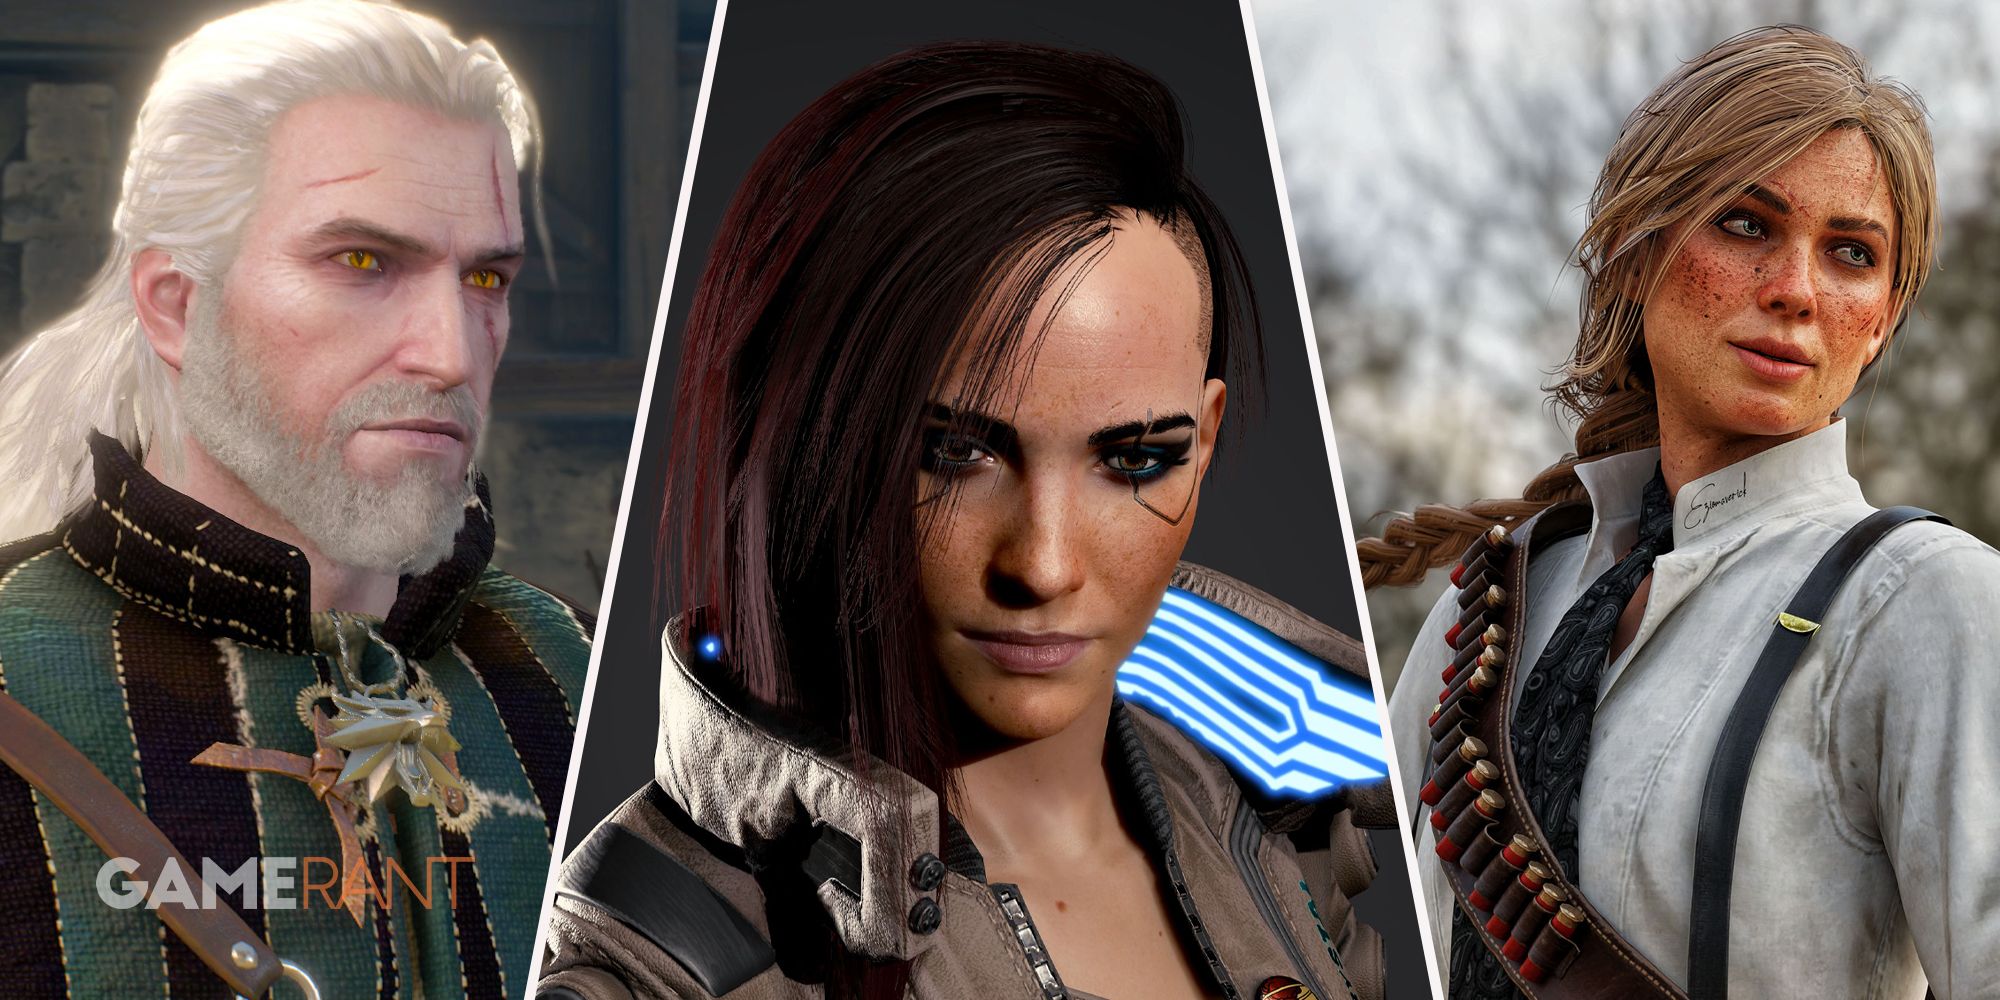 The Witcher Geralt of Rivia on left, Cyberpunk 2077 V in middle, Red Dead Redemption 2 Sadie Adler on right